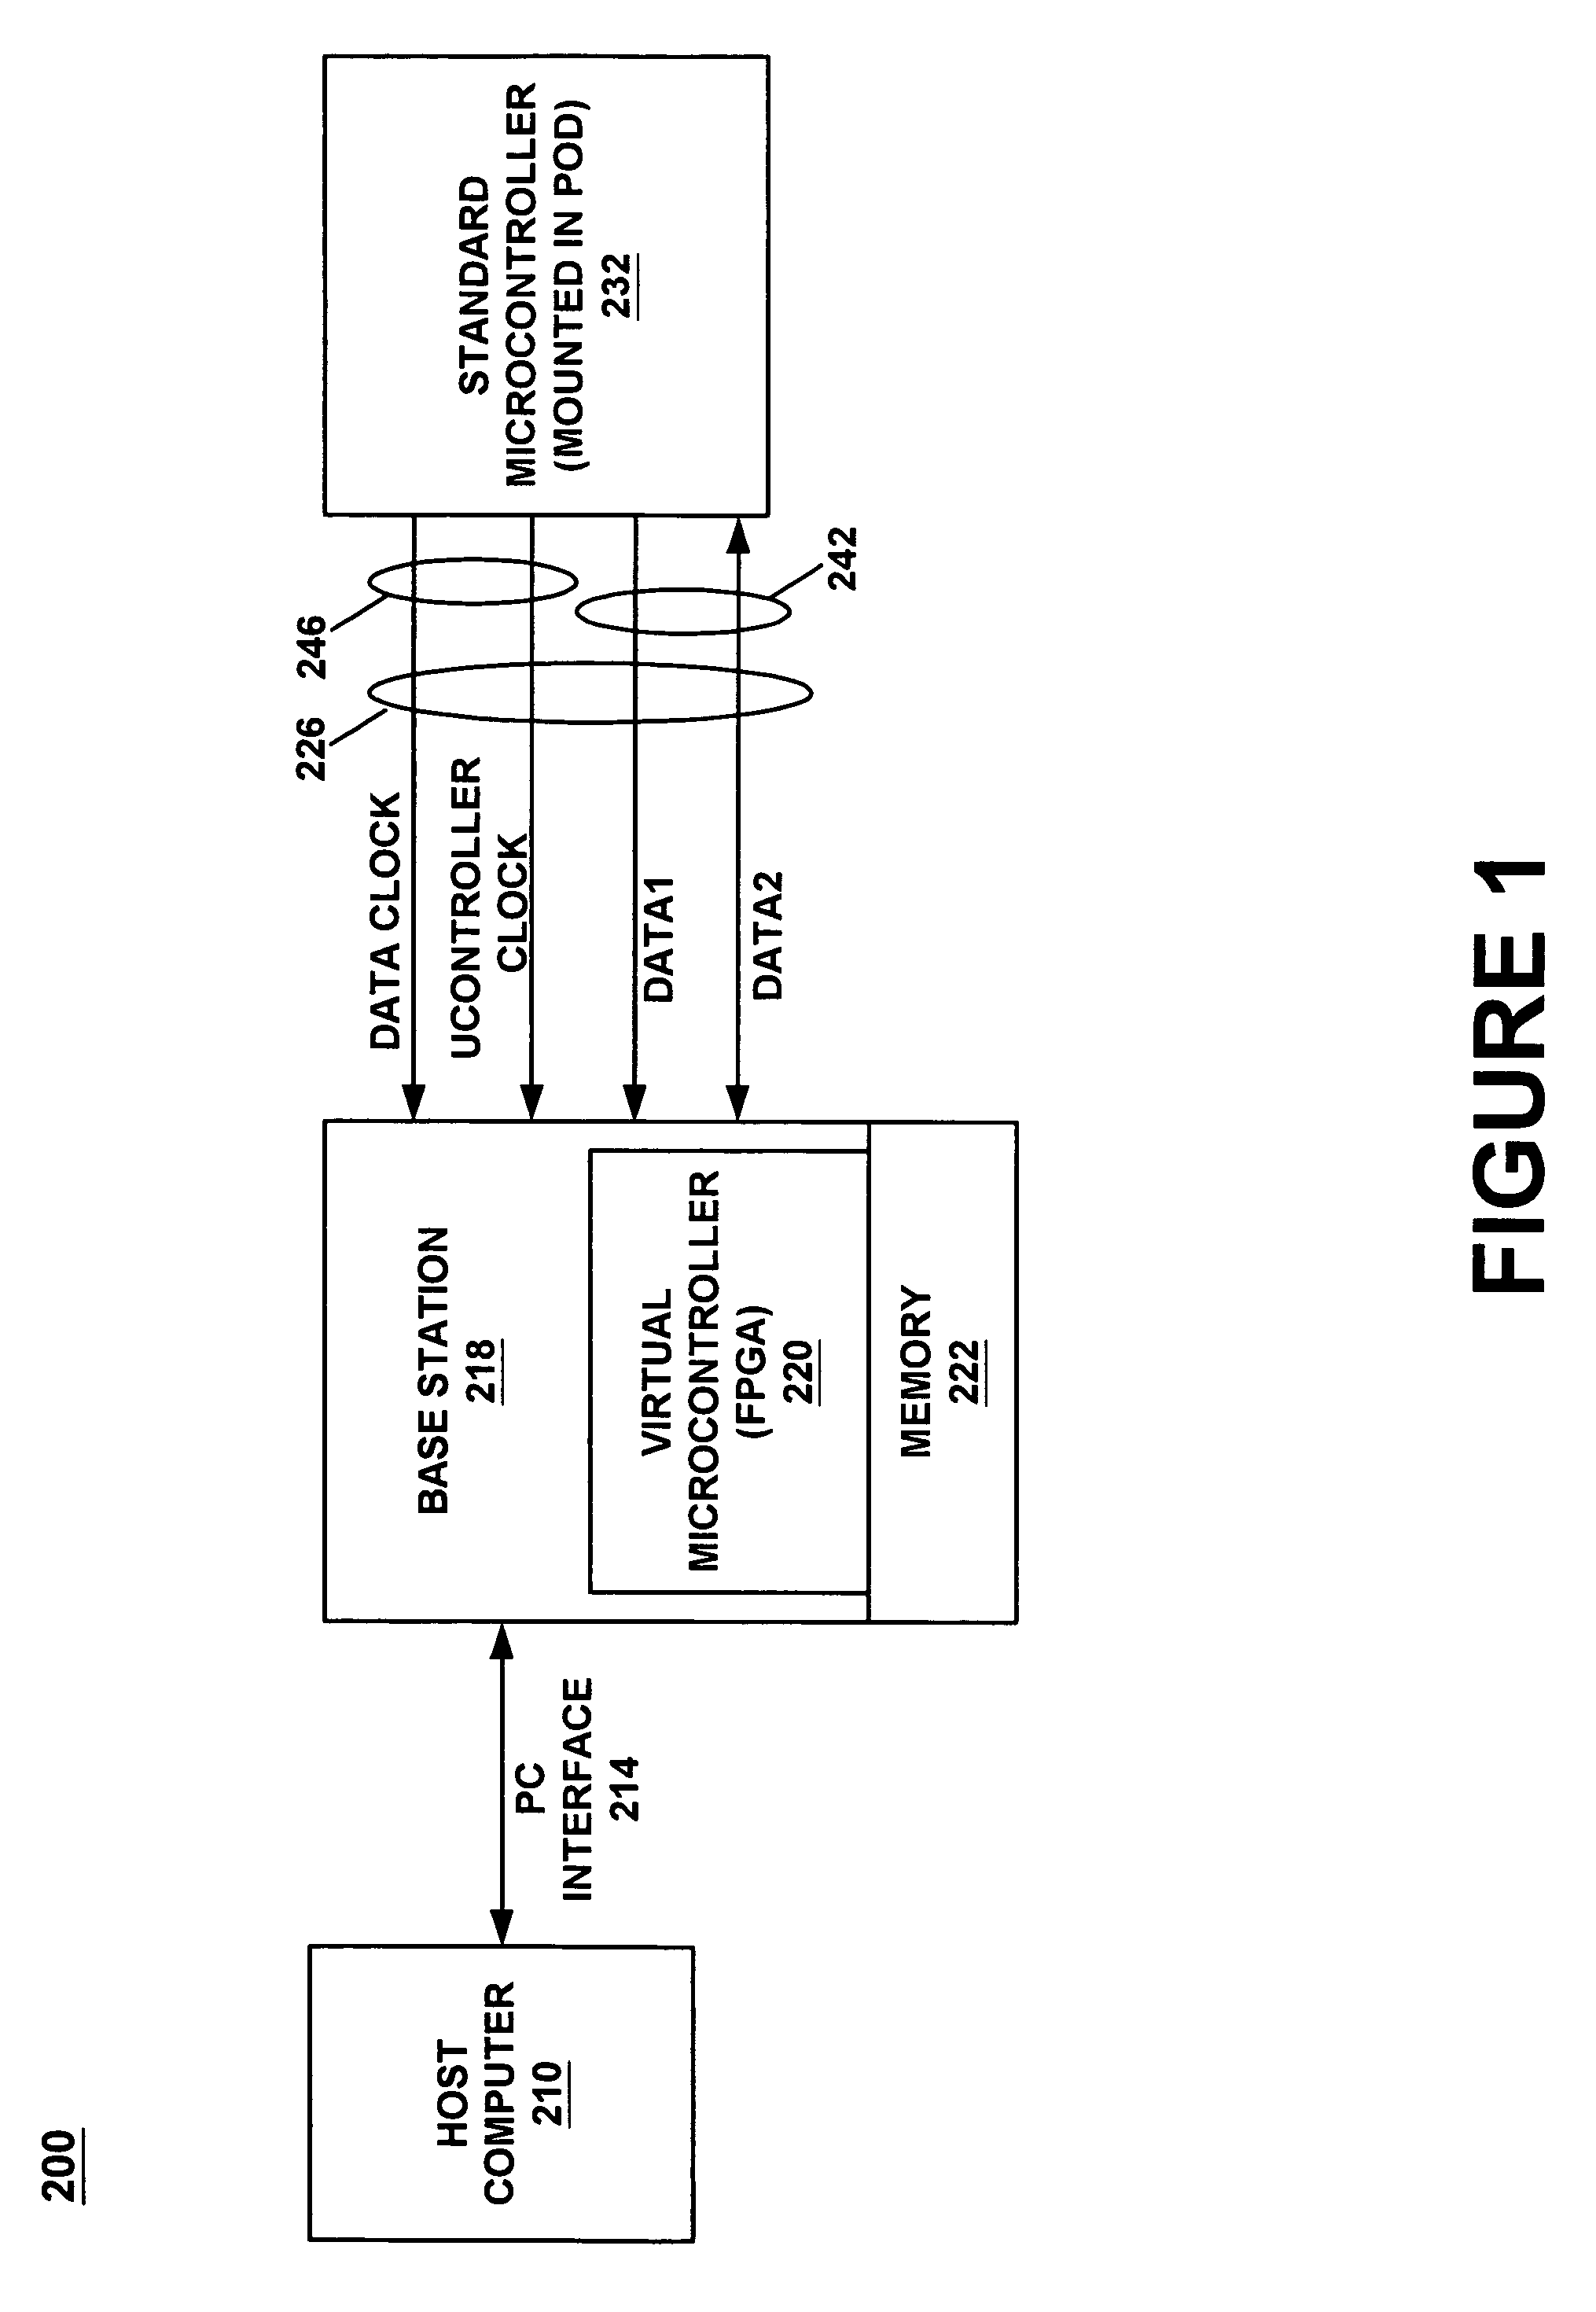 Sleep and stall in an in-circuit emulation system